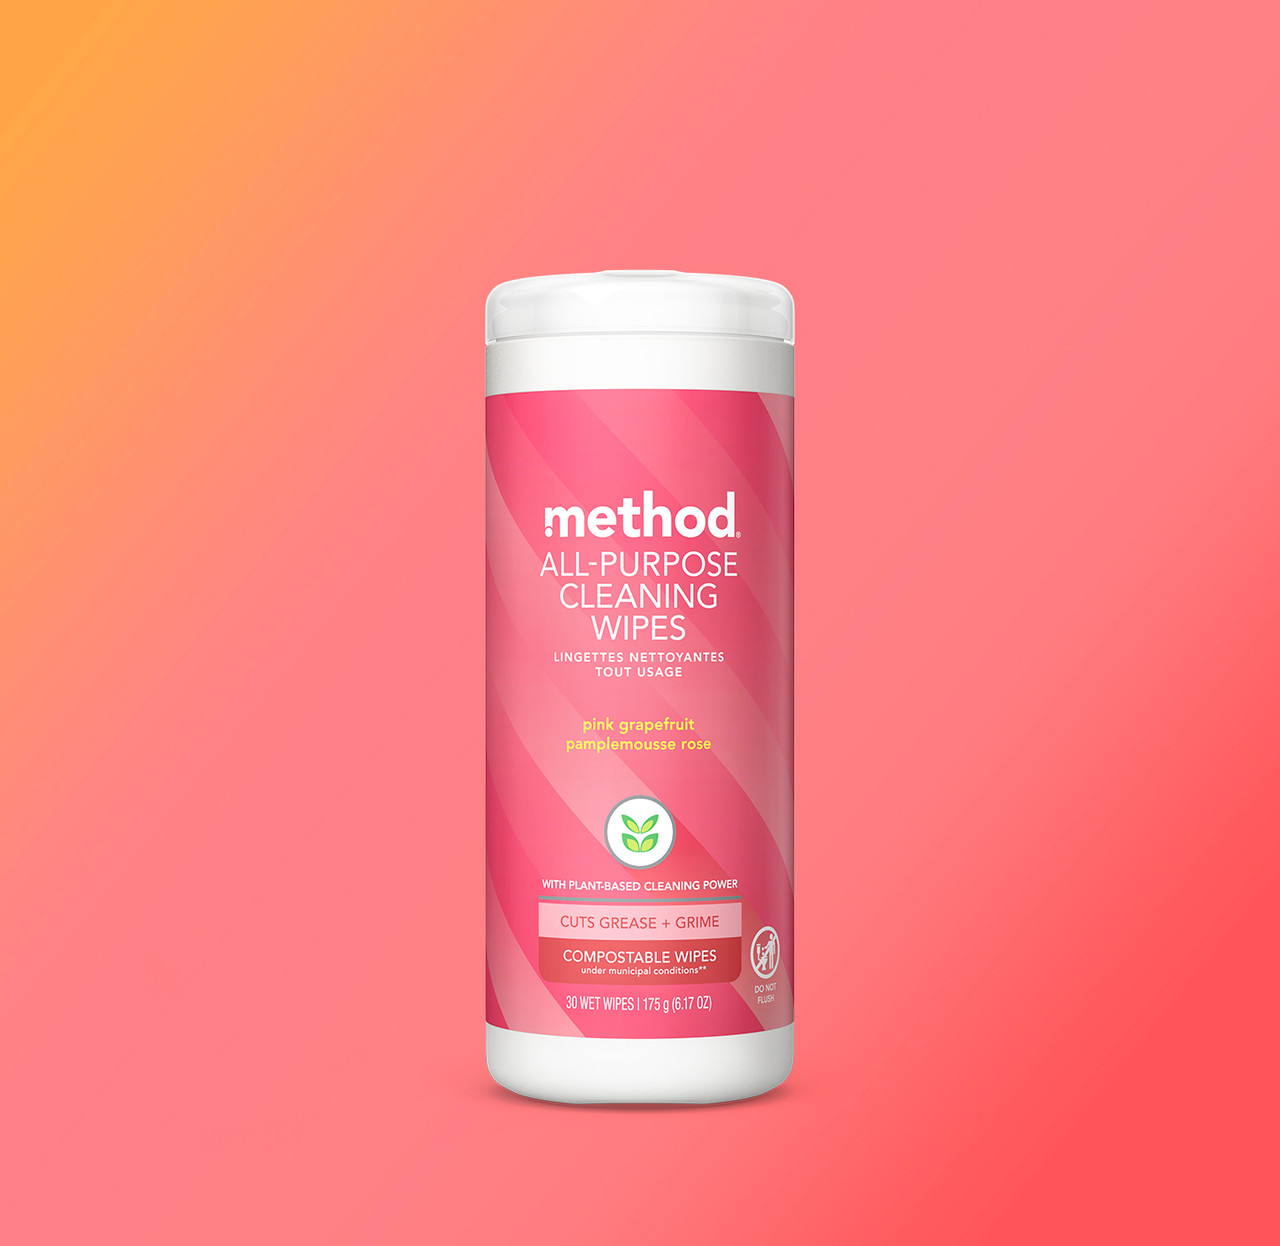 method  All-Purpose Cleaning Wipes, Pink Grapefruit, 30 ct